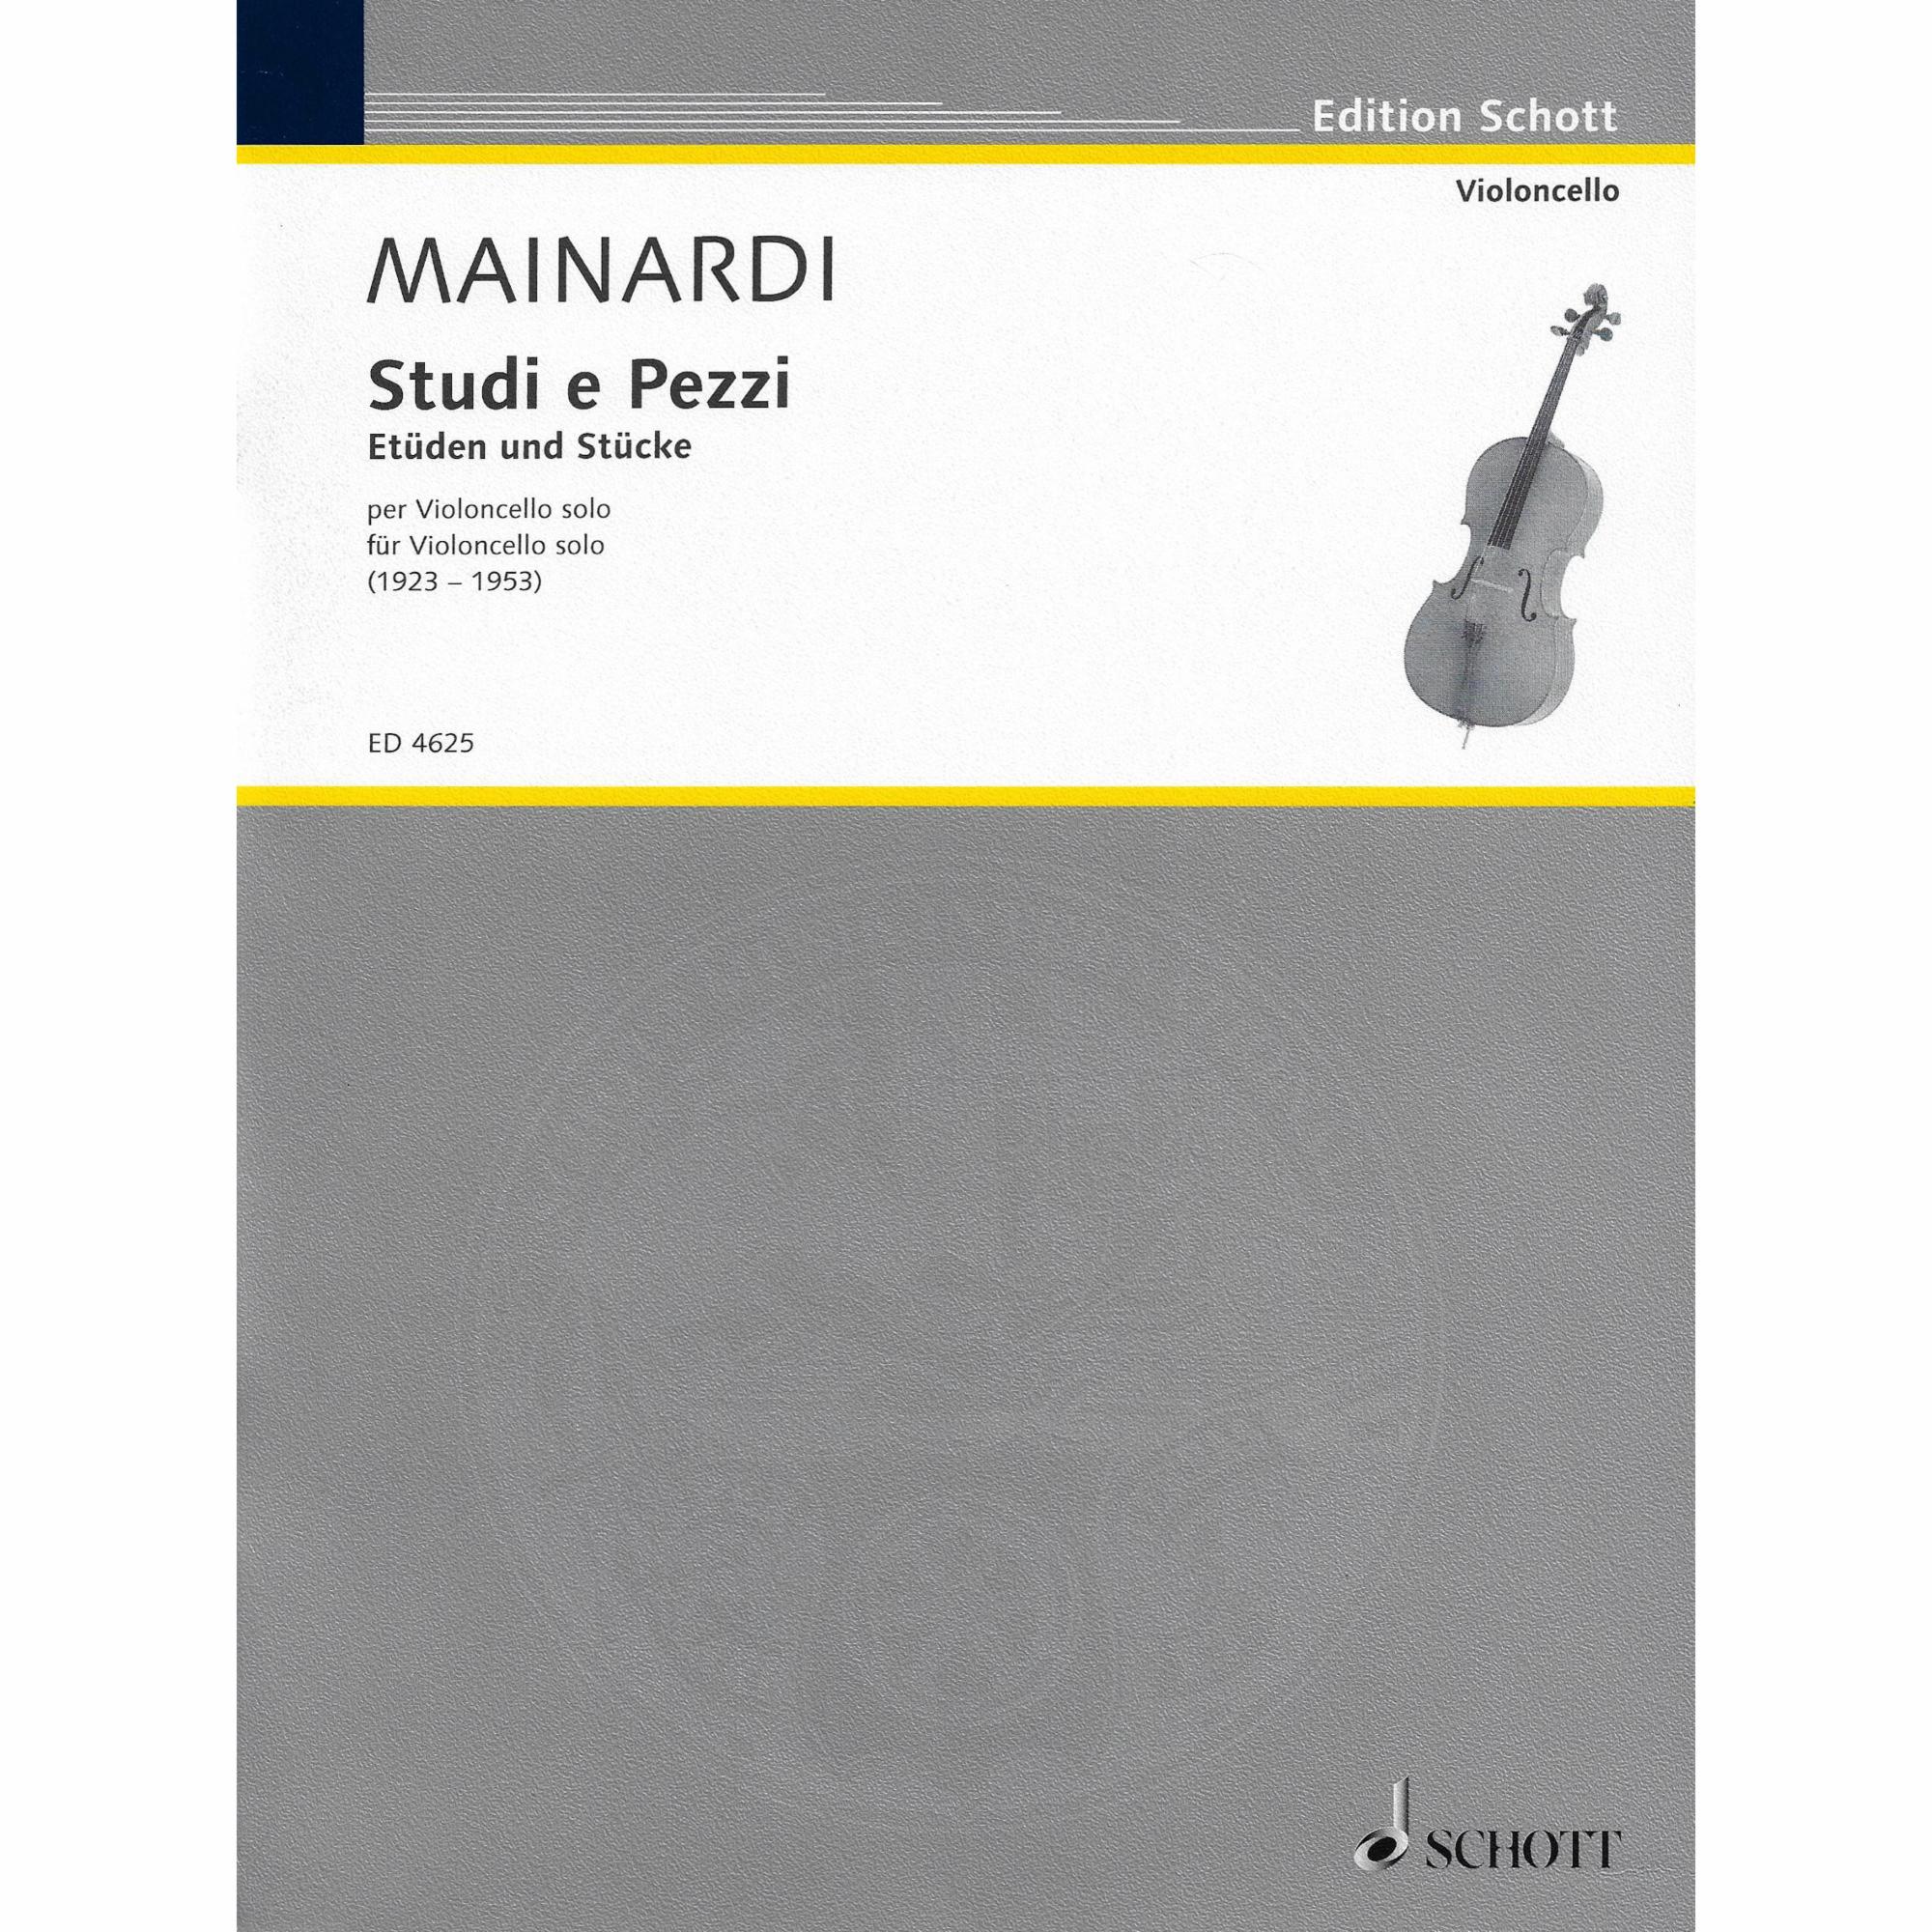 Mainardi -- Studies and Pieces for Solo Cello